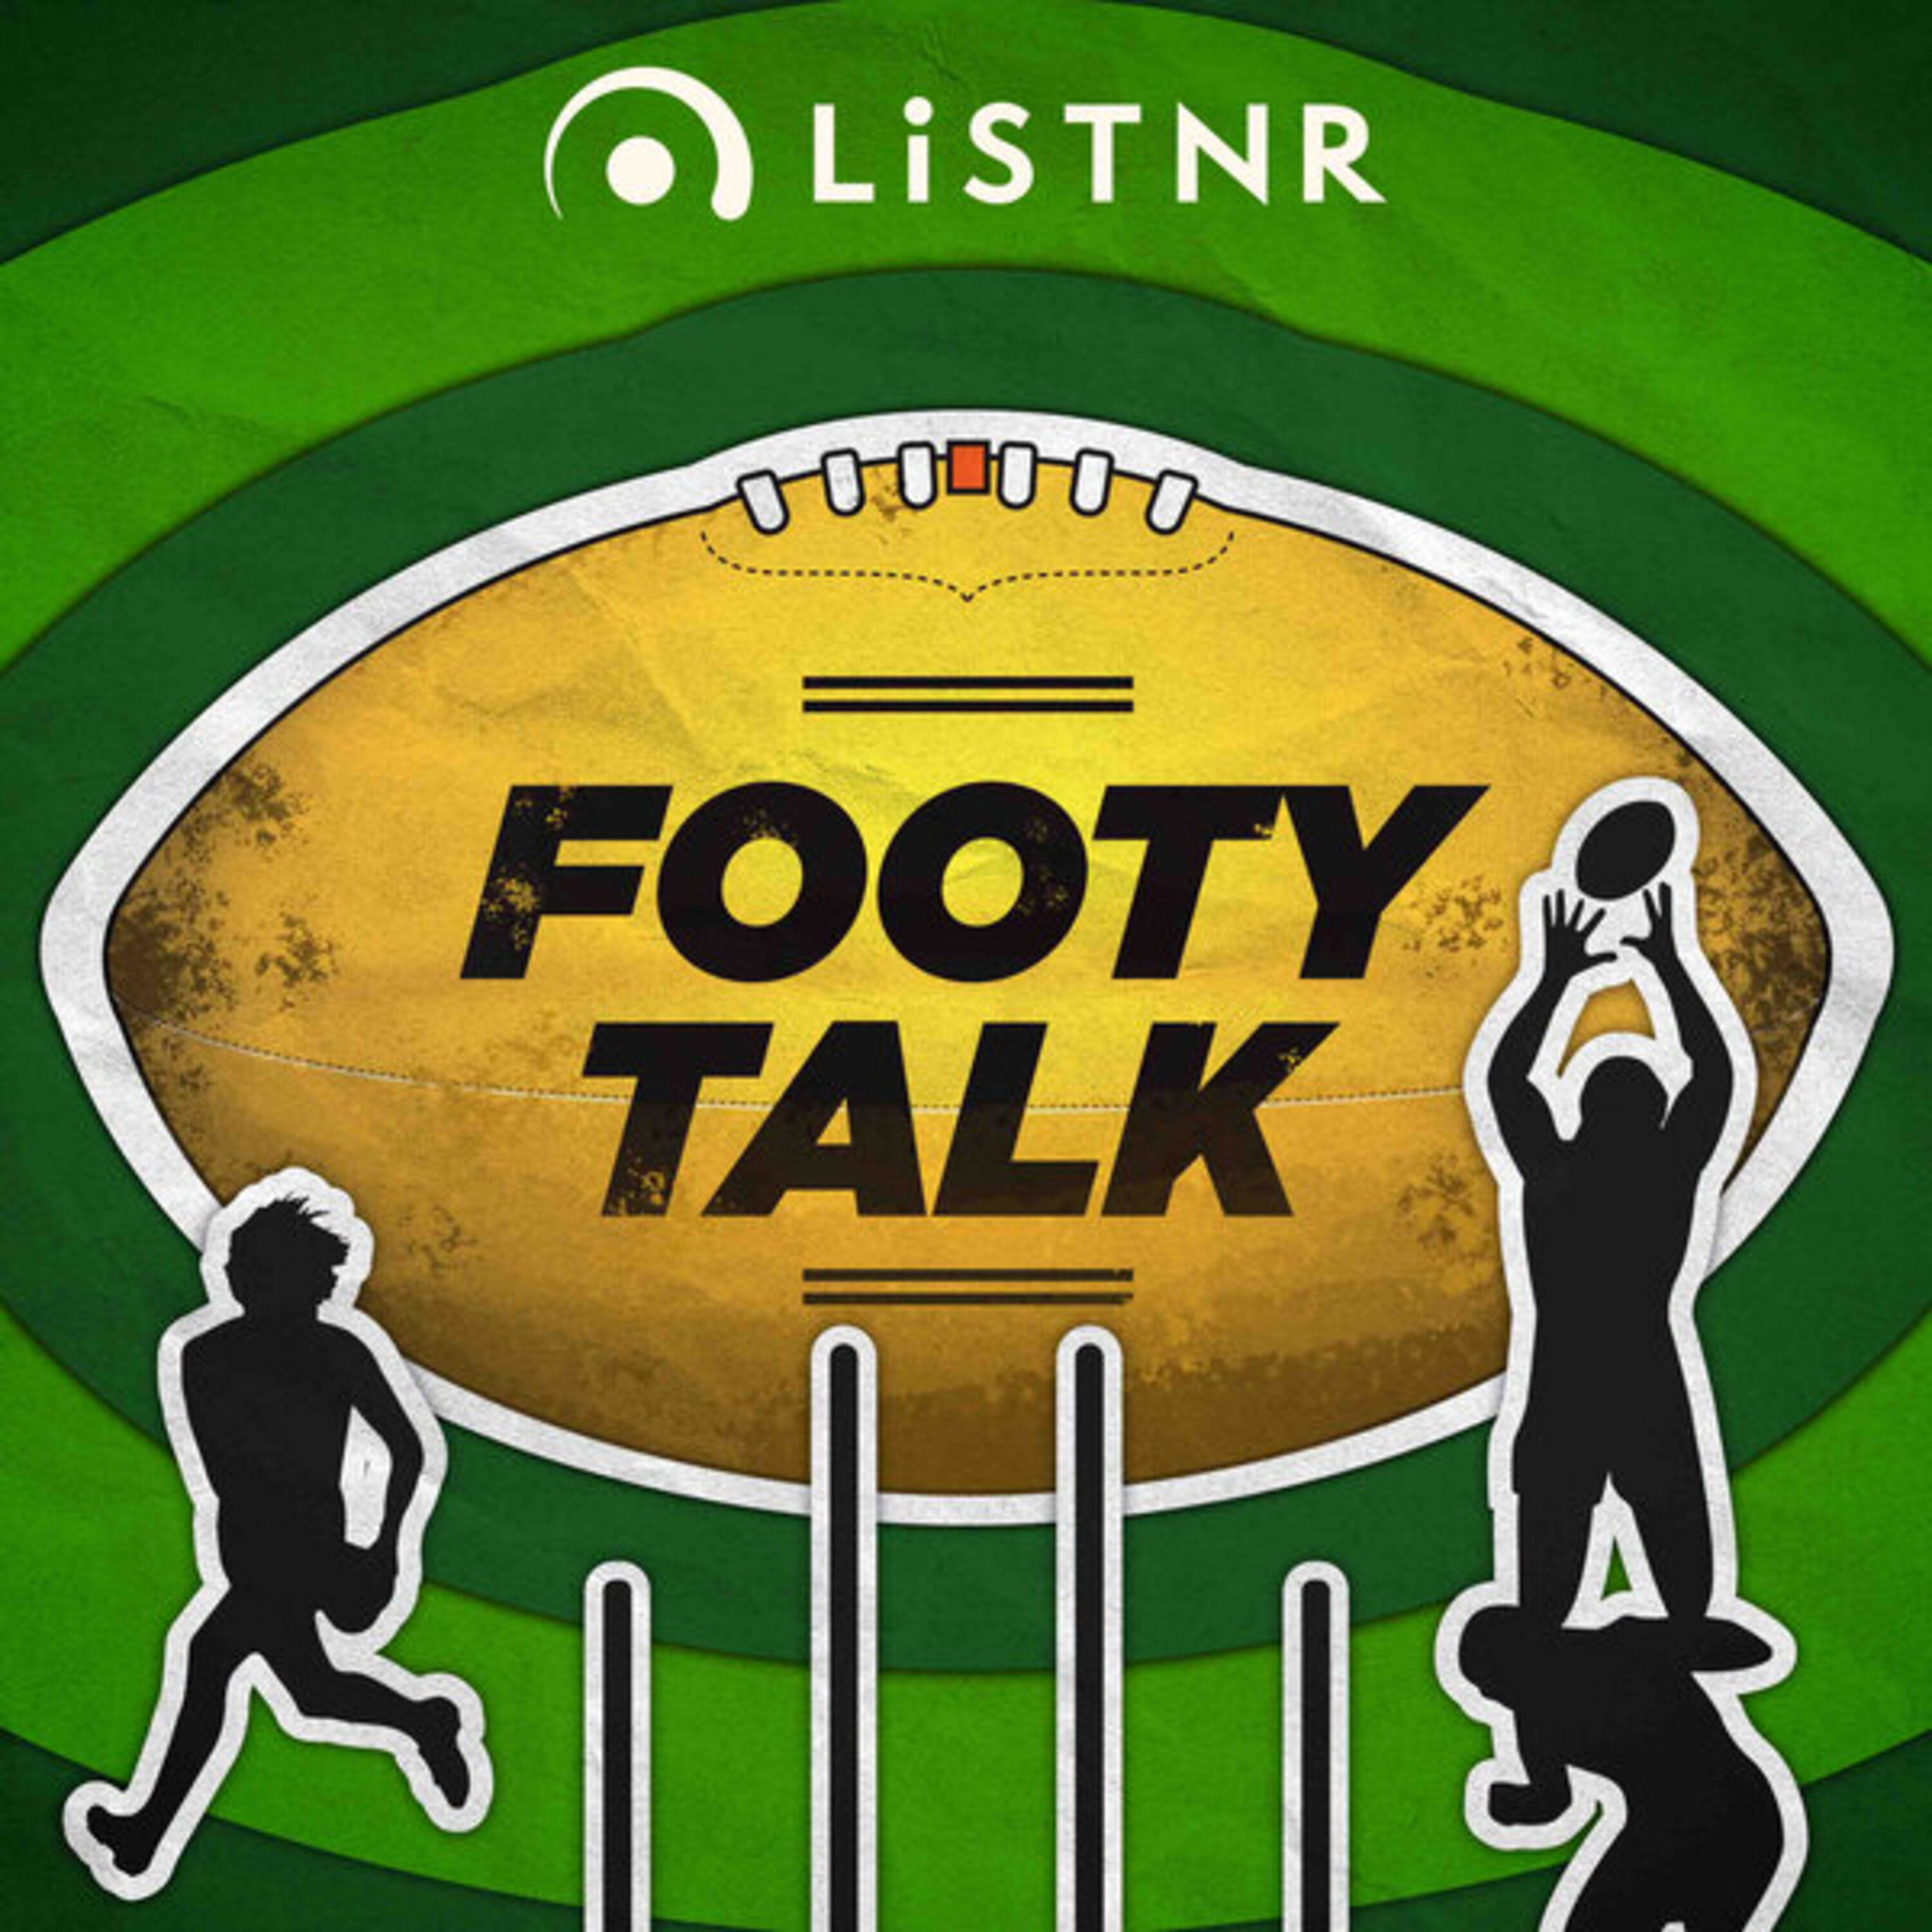 FOOTY TALK | Tuesday March 28: Booing Bogans, Ange Postecoglou's impact on Clarko and Melbourne's opportunity to adapt, improvise and overcome